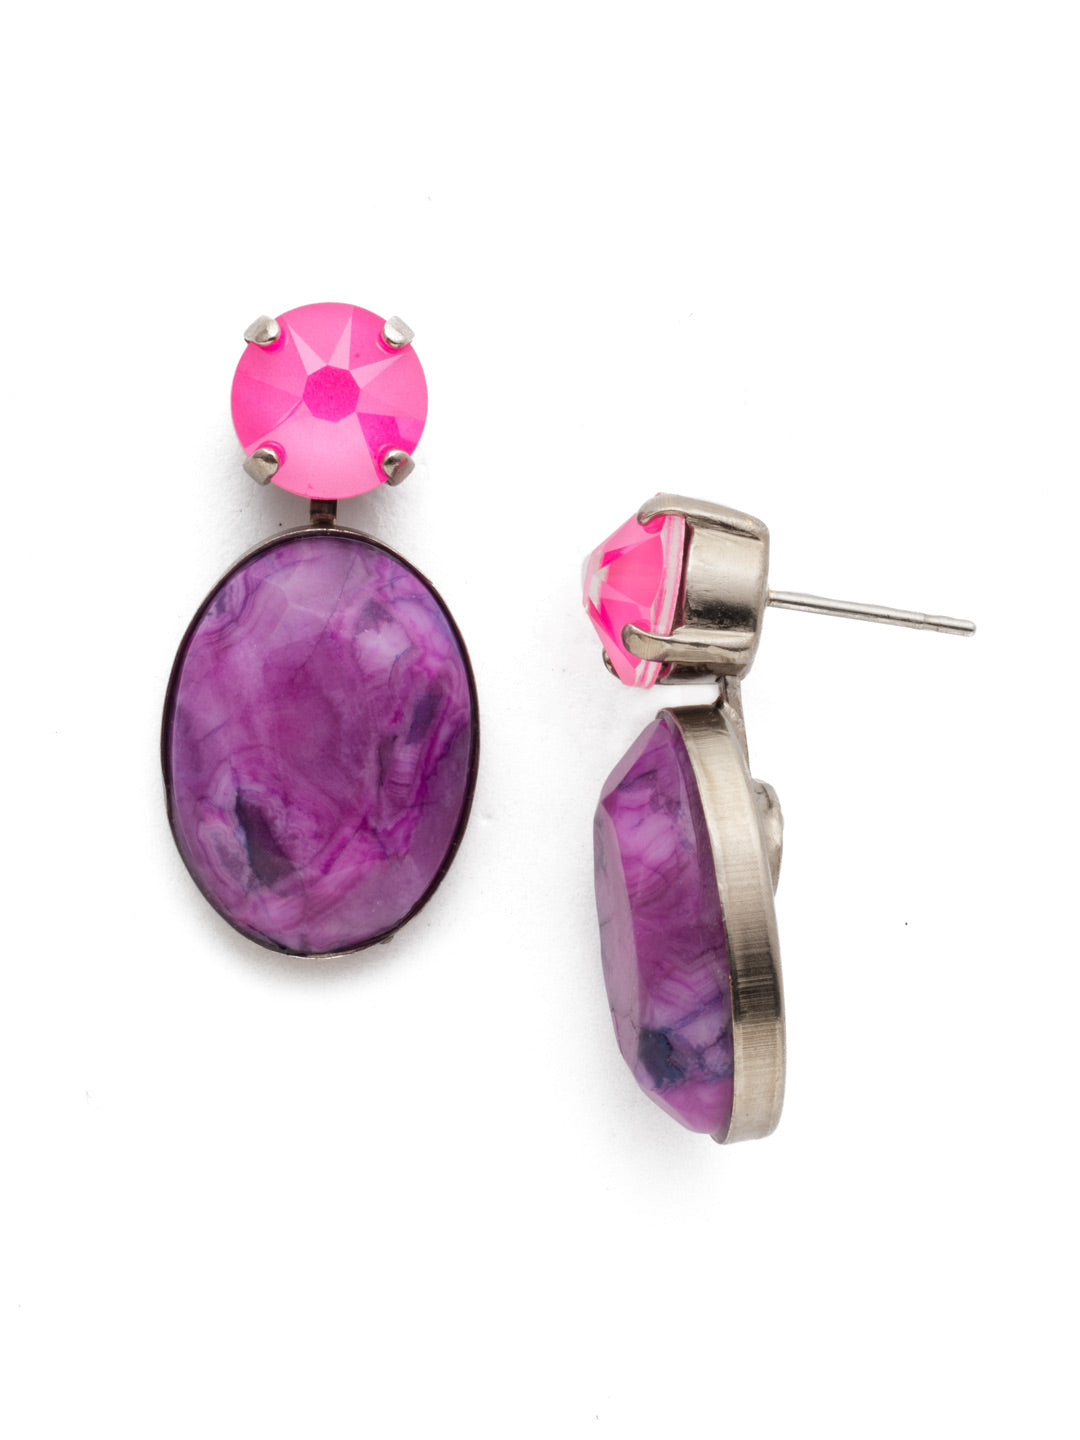 Teardrop Onyx Dangle Earrings - ECM9ASETP - A tried and true classic! A large teardrop crystal hanging from a round crystal post make these earrings perfect for any occasion. From Sorrelli's Electric Pink collection in our Antique Silver-tone finish.